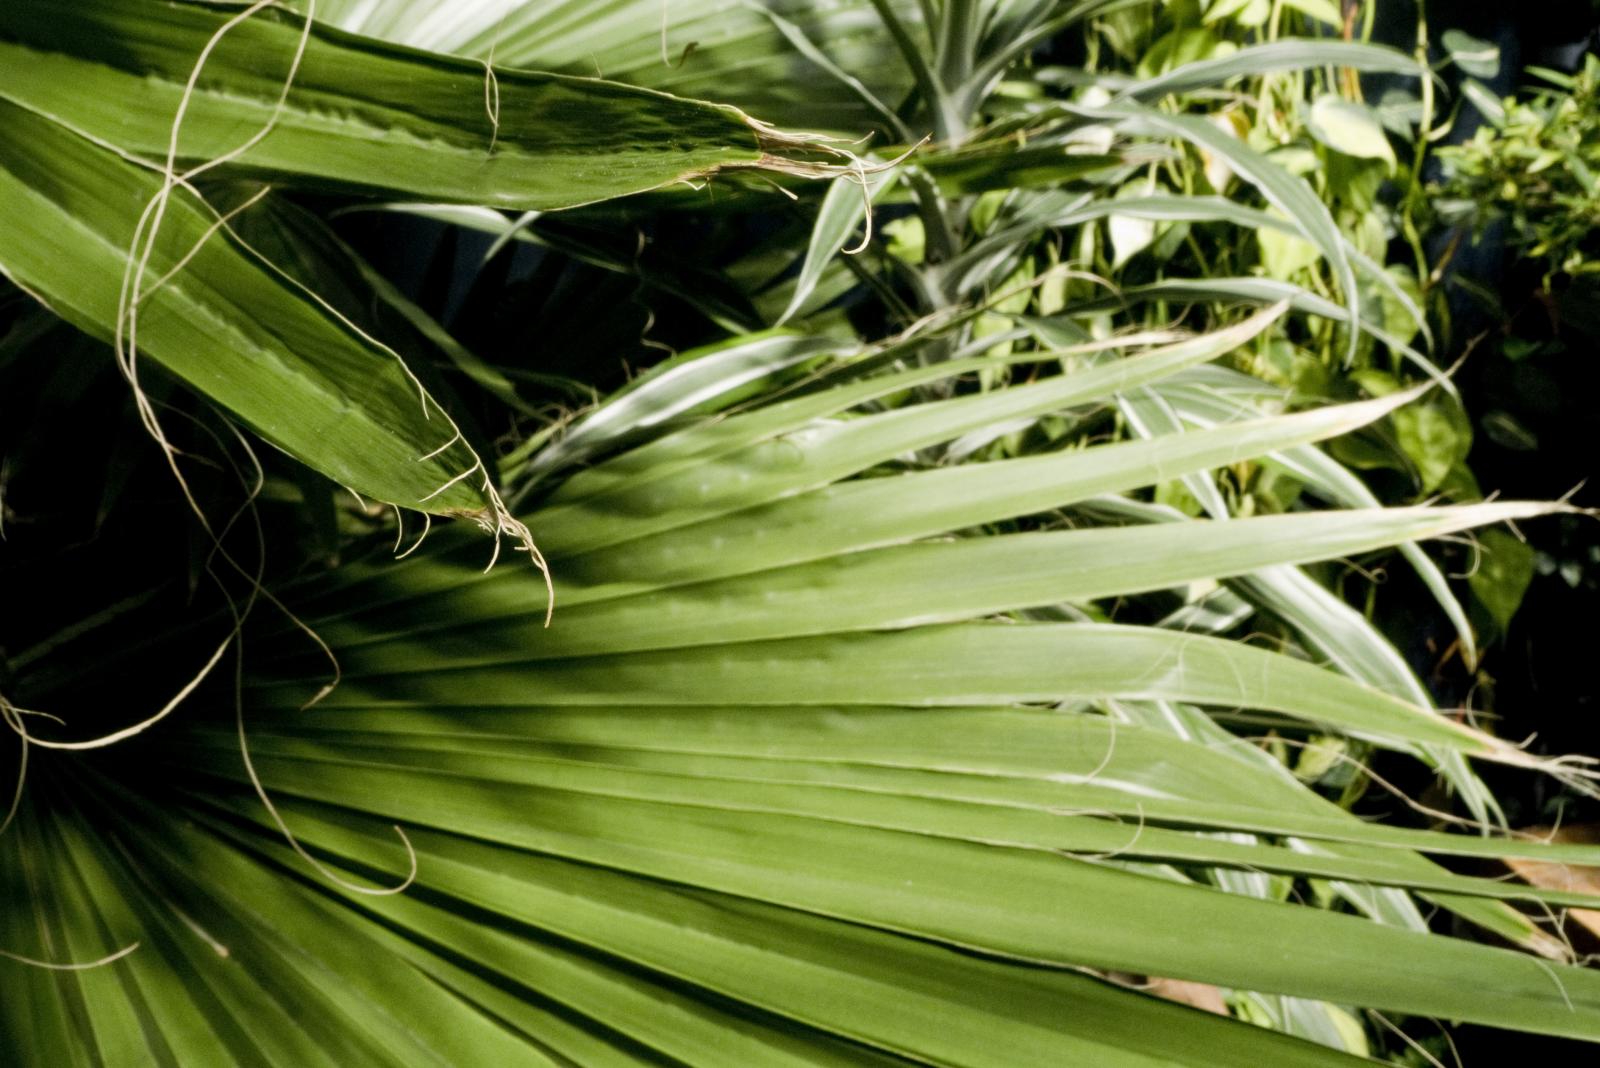 the long thin, green palm frondy leaves on a plant